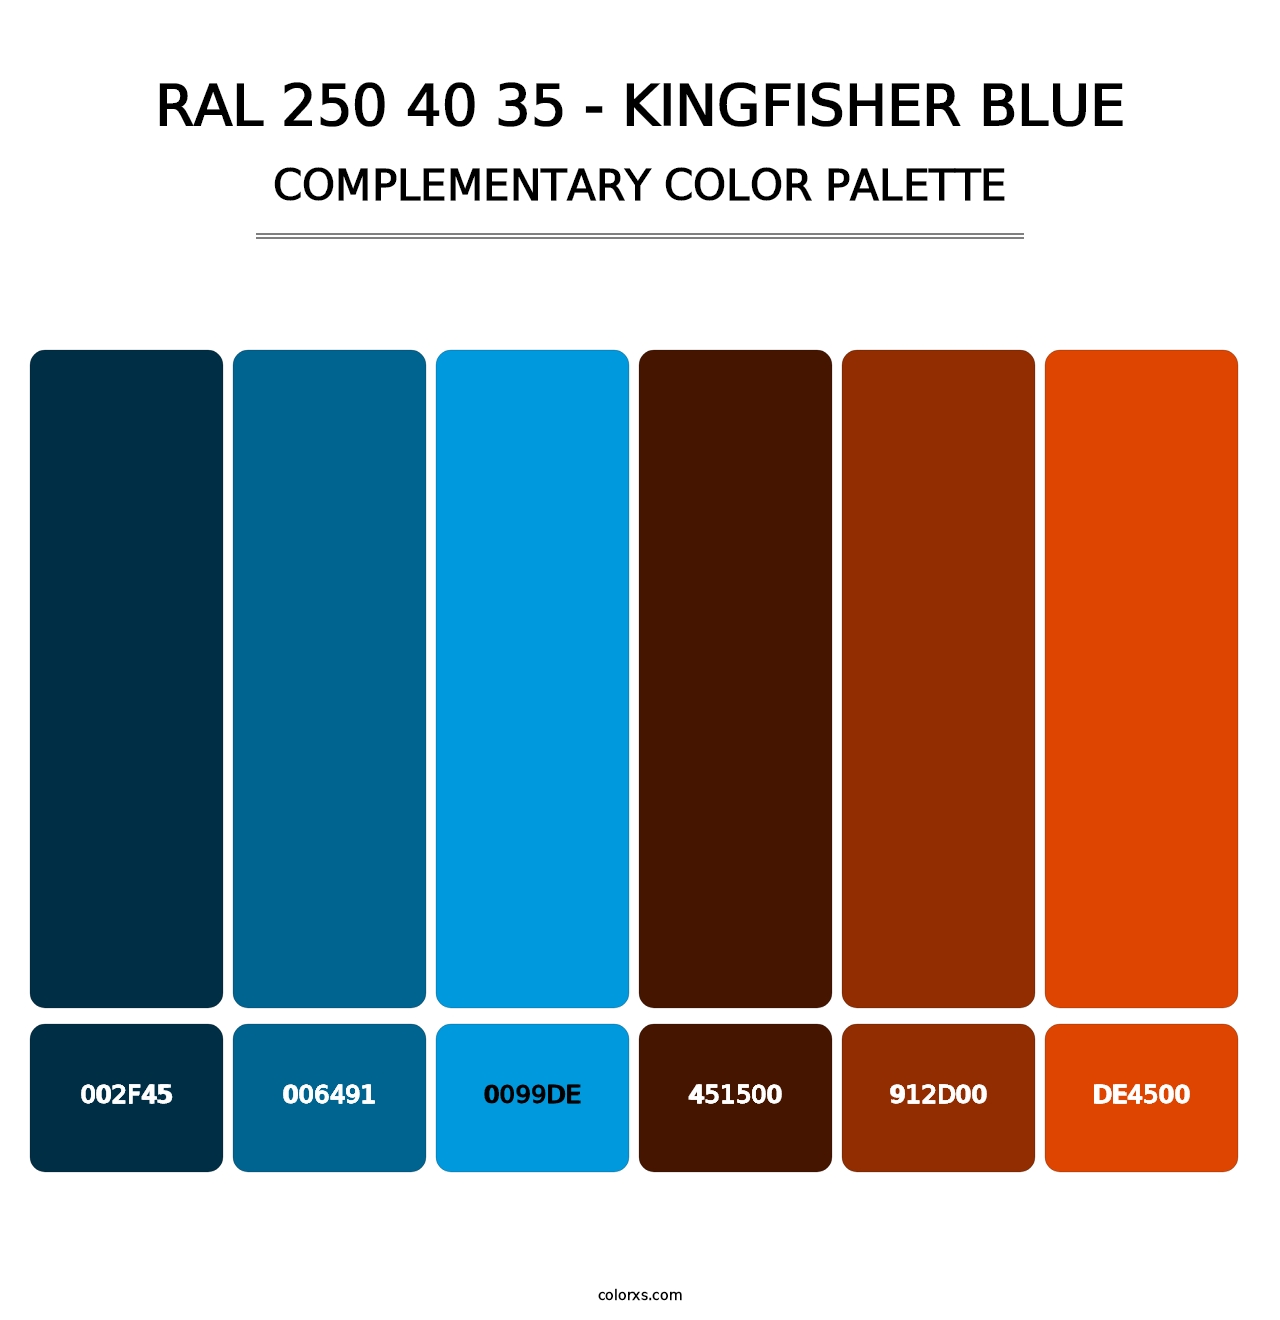 RAL 250 40 35 - Kingfisher Blue - Complementary Color Palette